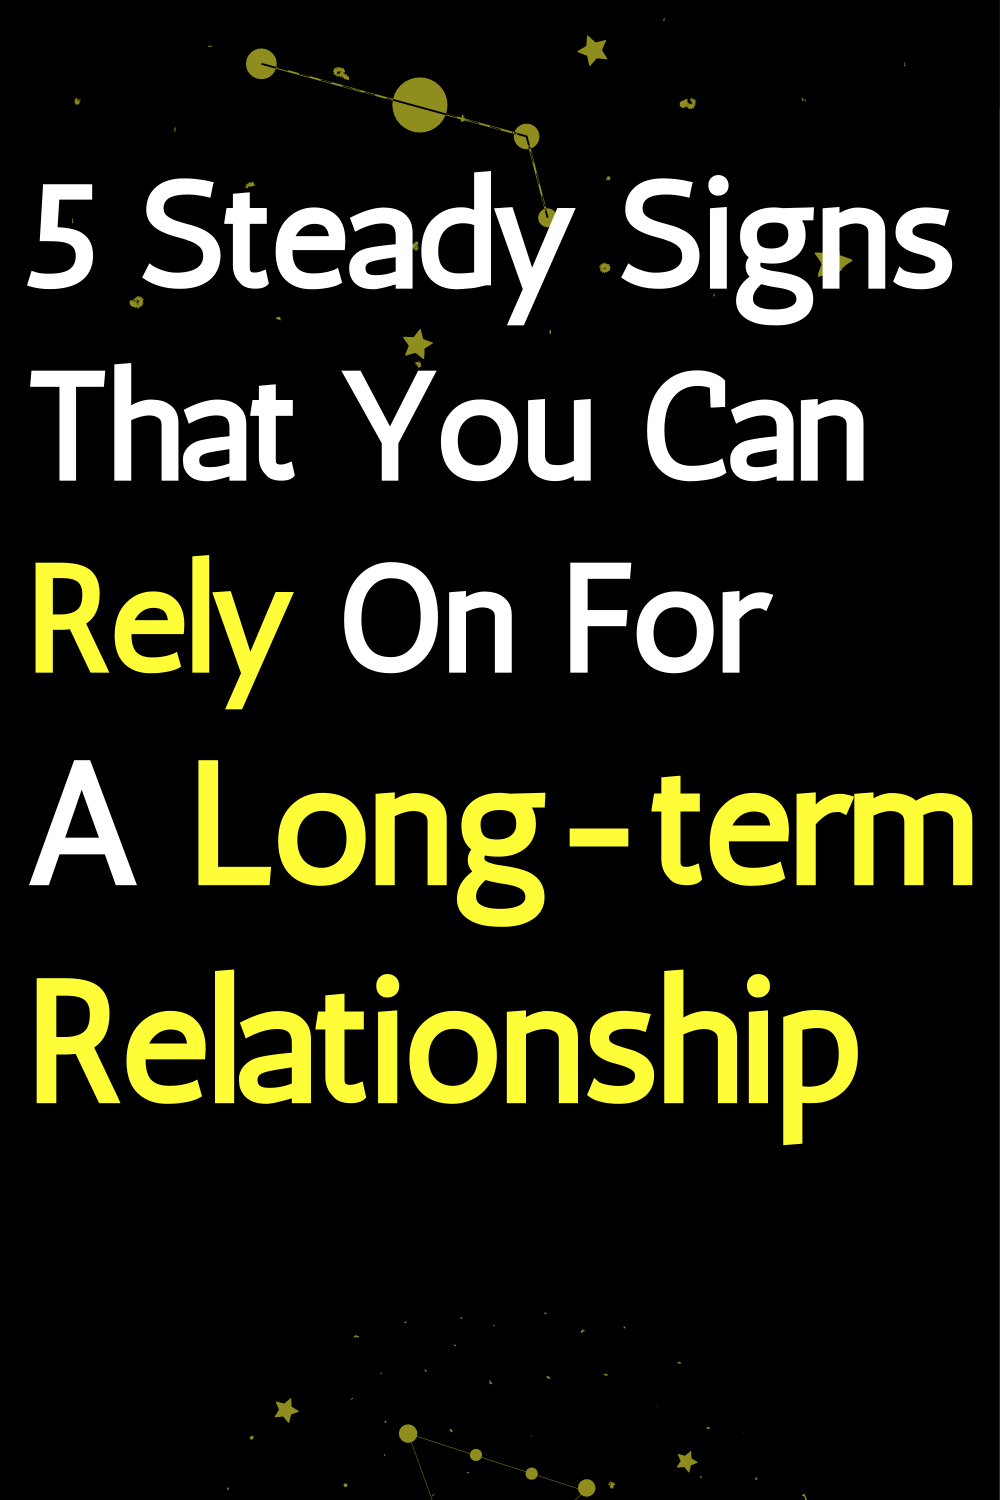 5 Steady Signs That You Can Rely On For A Long-term Relationship